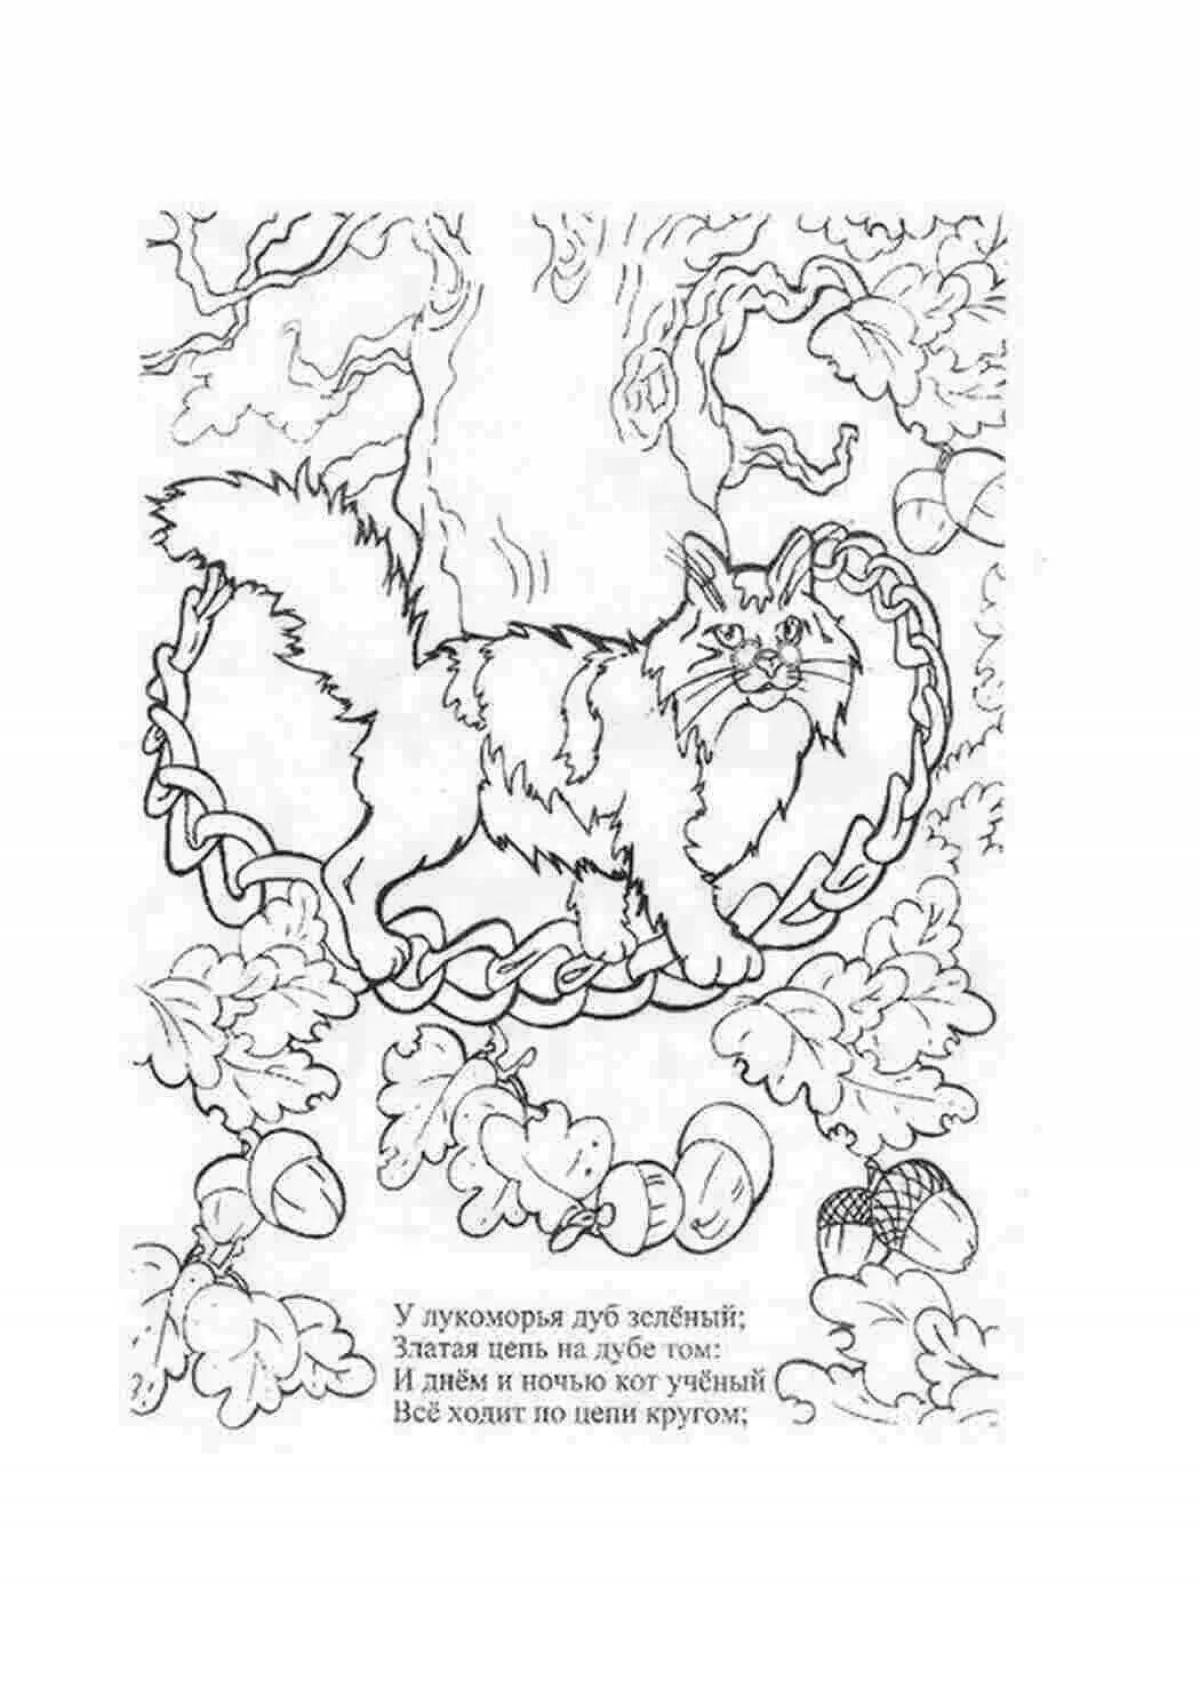 Exotic coloring book based on Pushkin's fairy tales